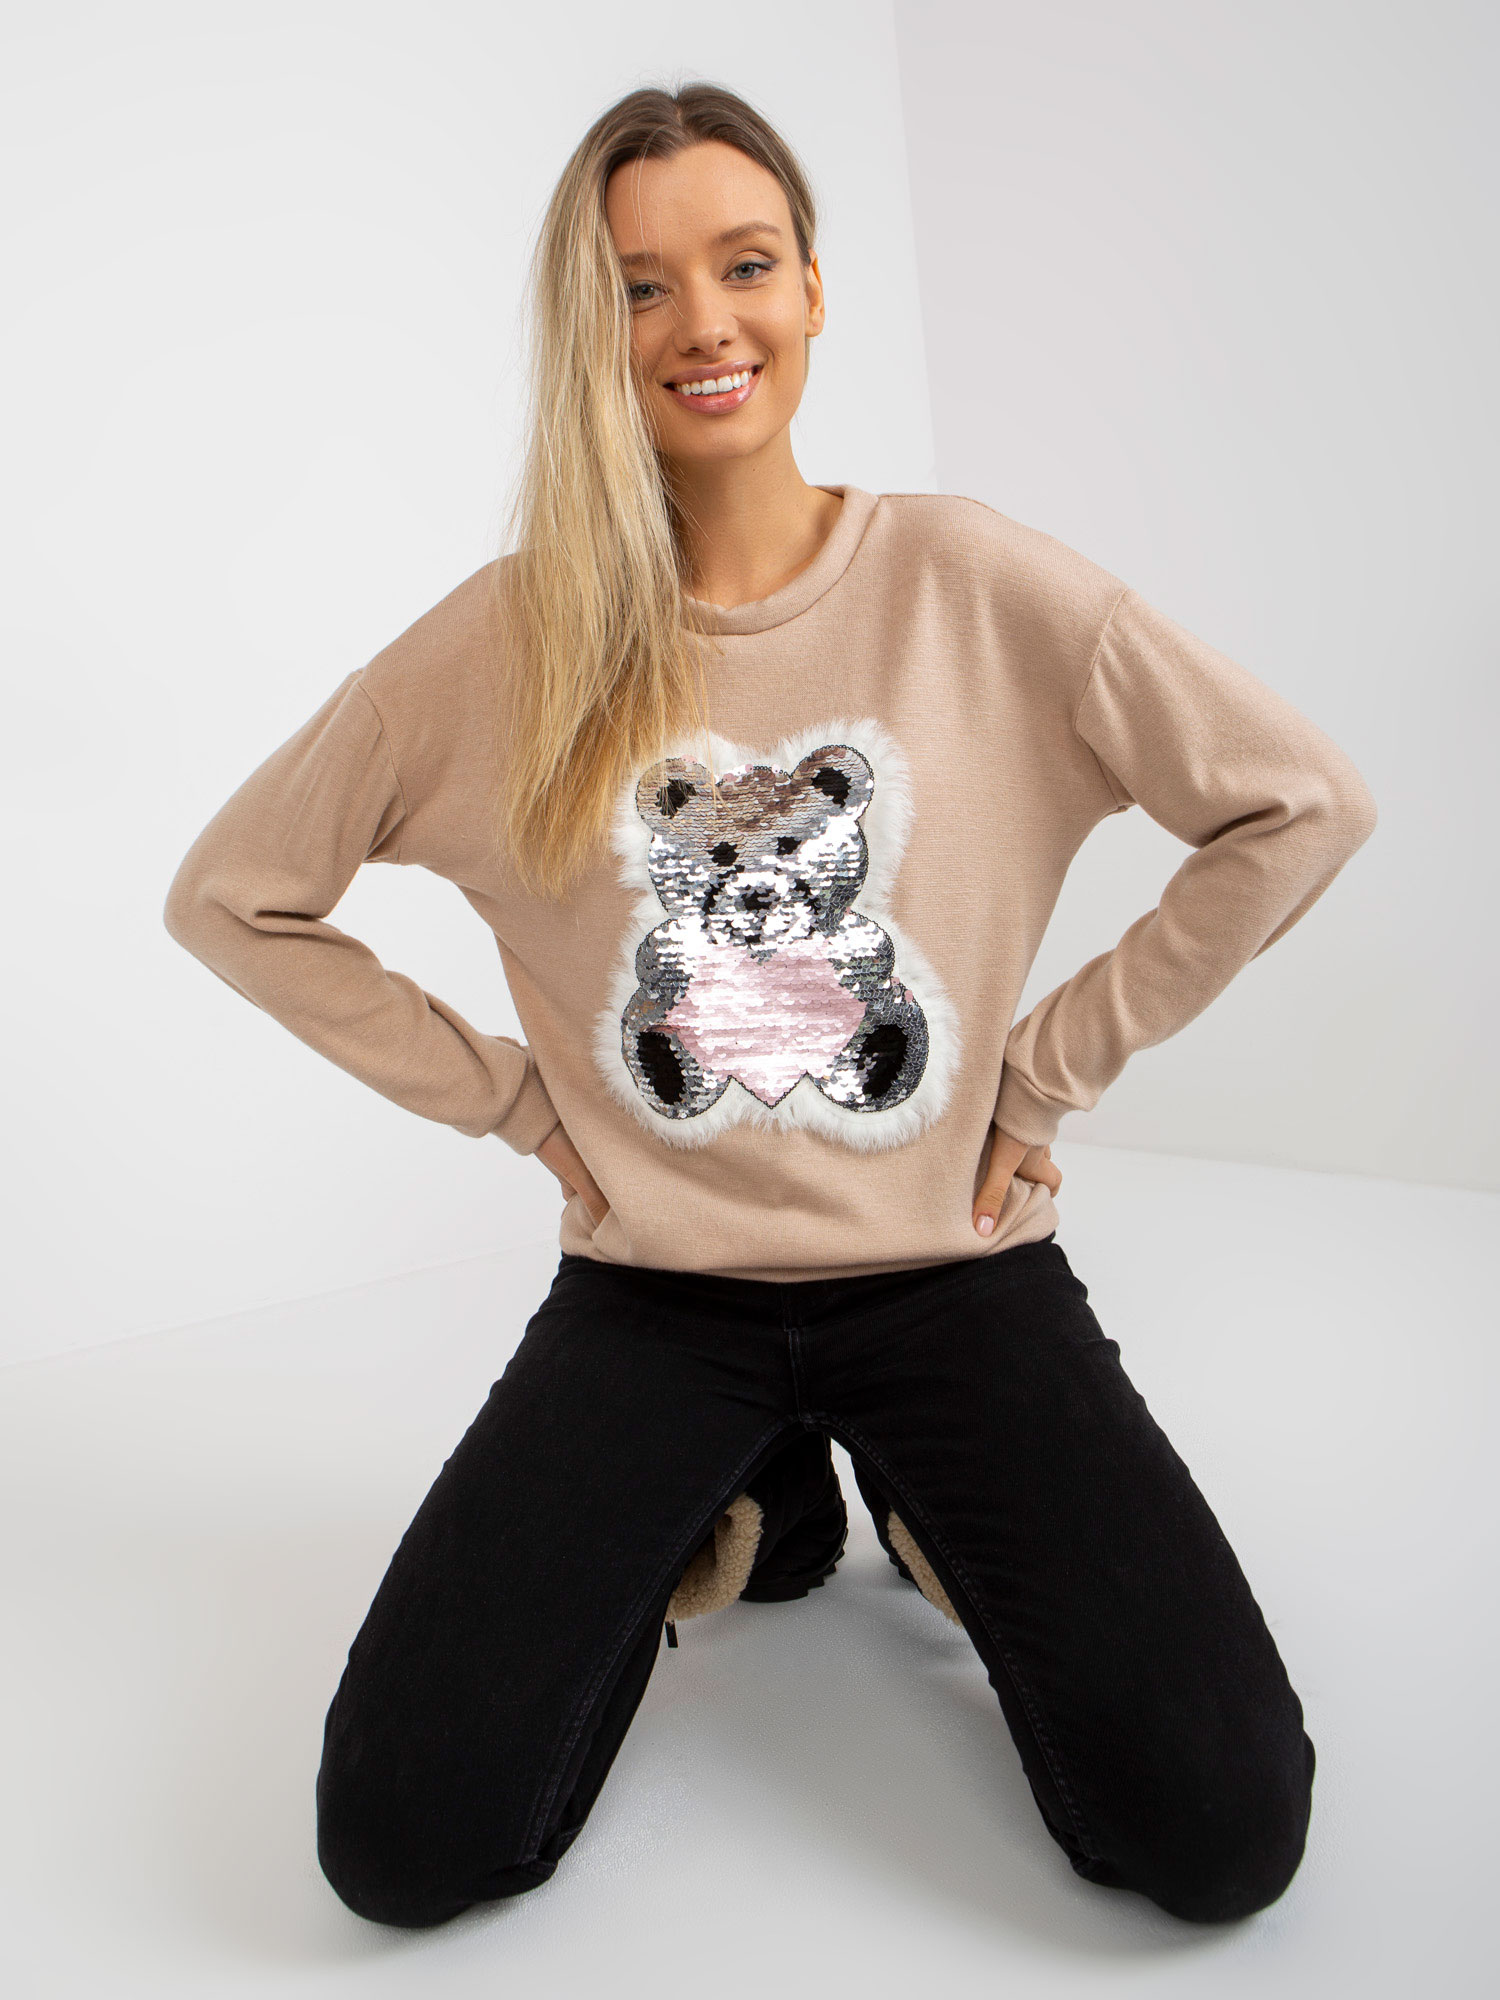 Women's beige classic sweater with sequined application